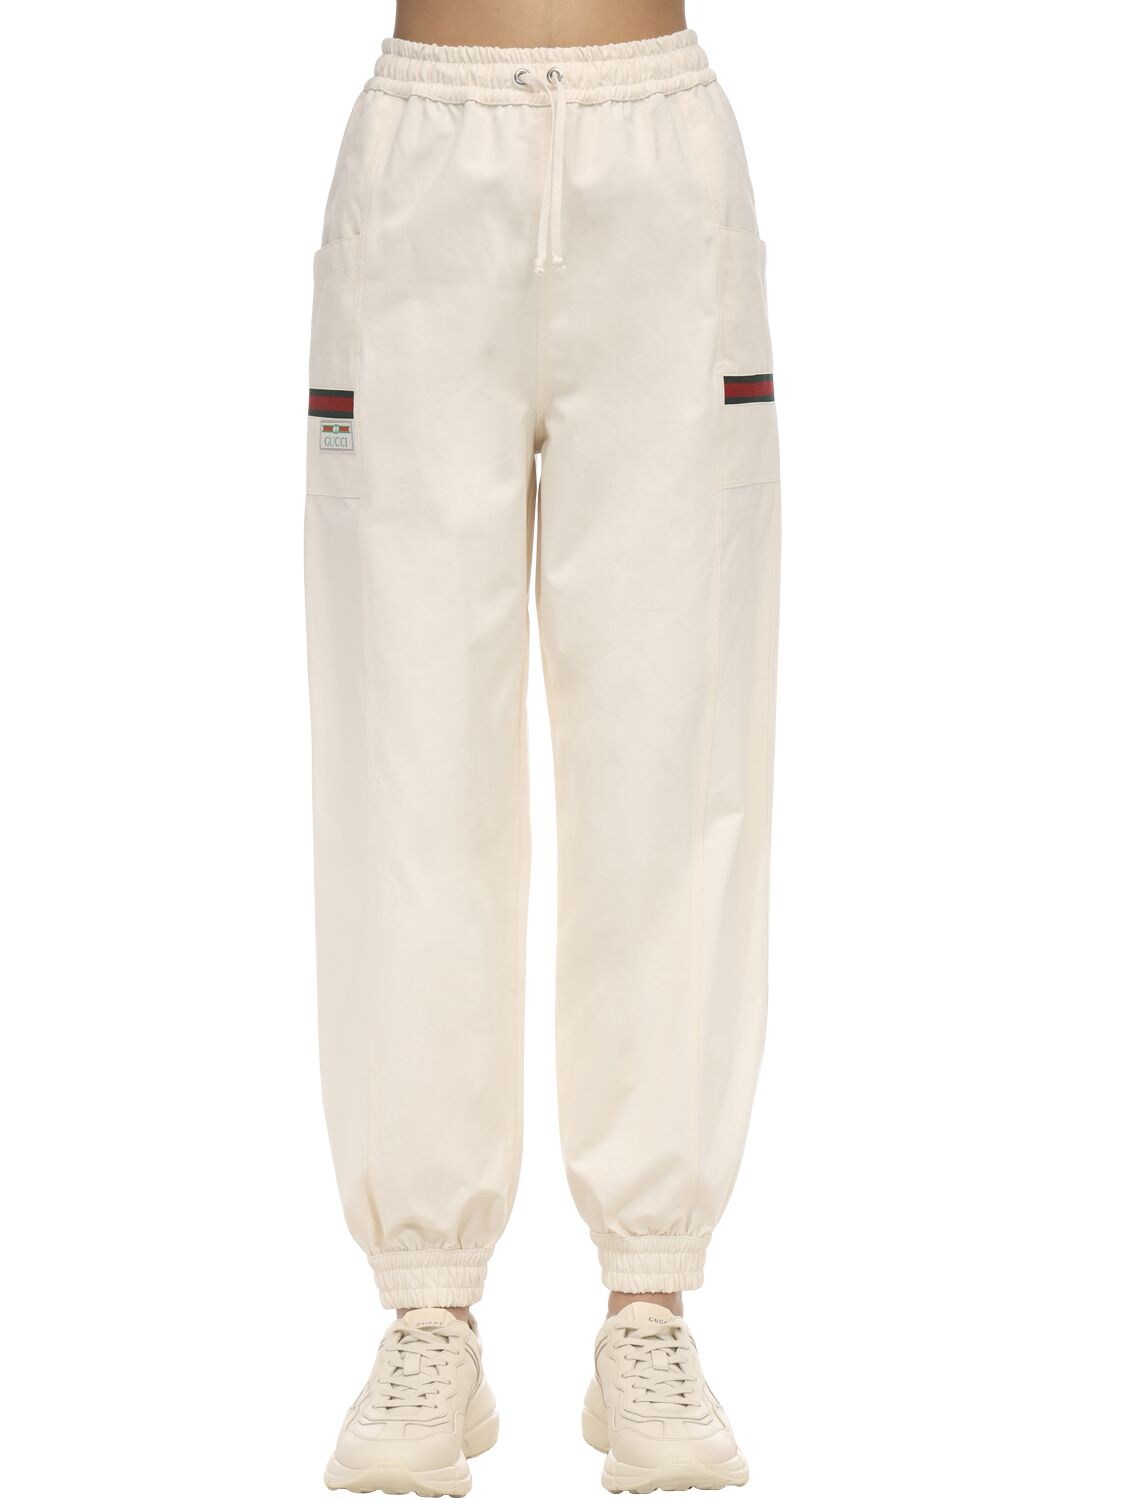 GUCCI COTTON CANVAS TRACKtrousers W/GG PATCH,71I5K1043-OTM4MQ2